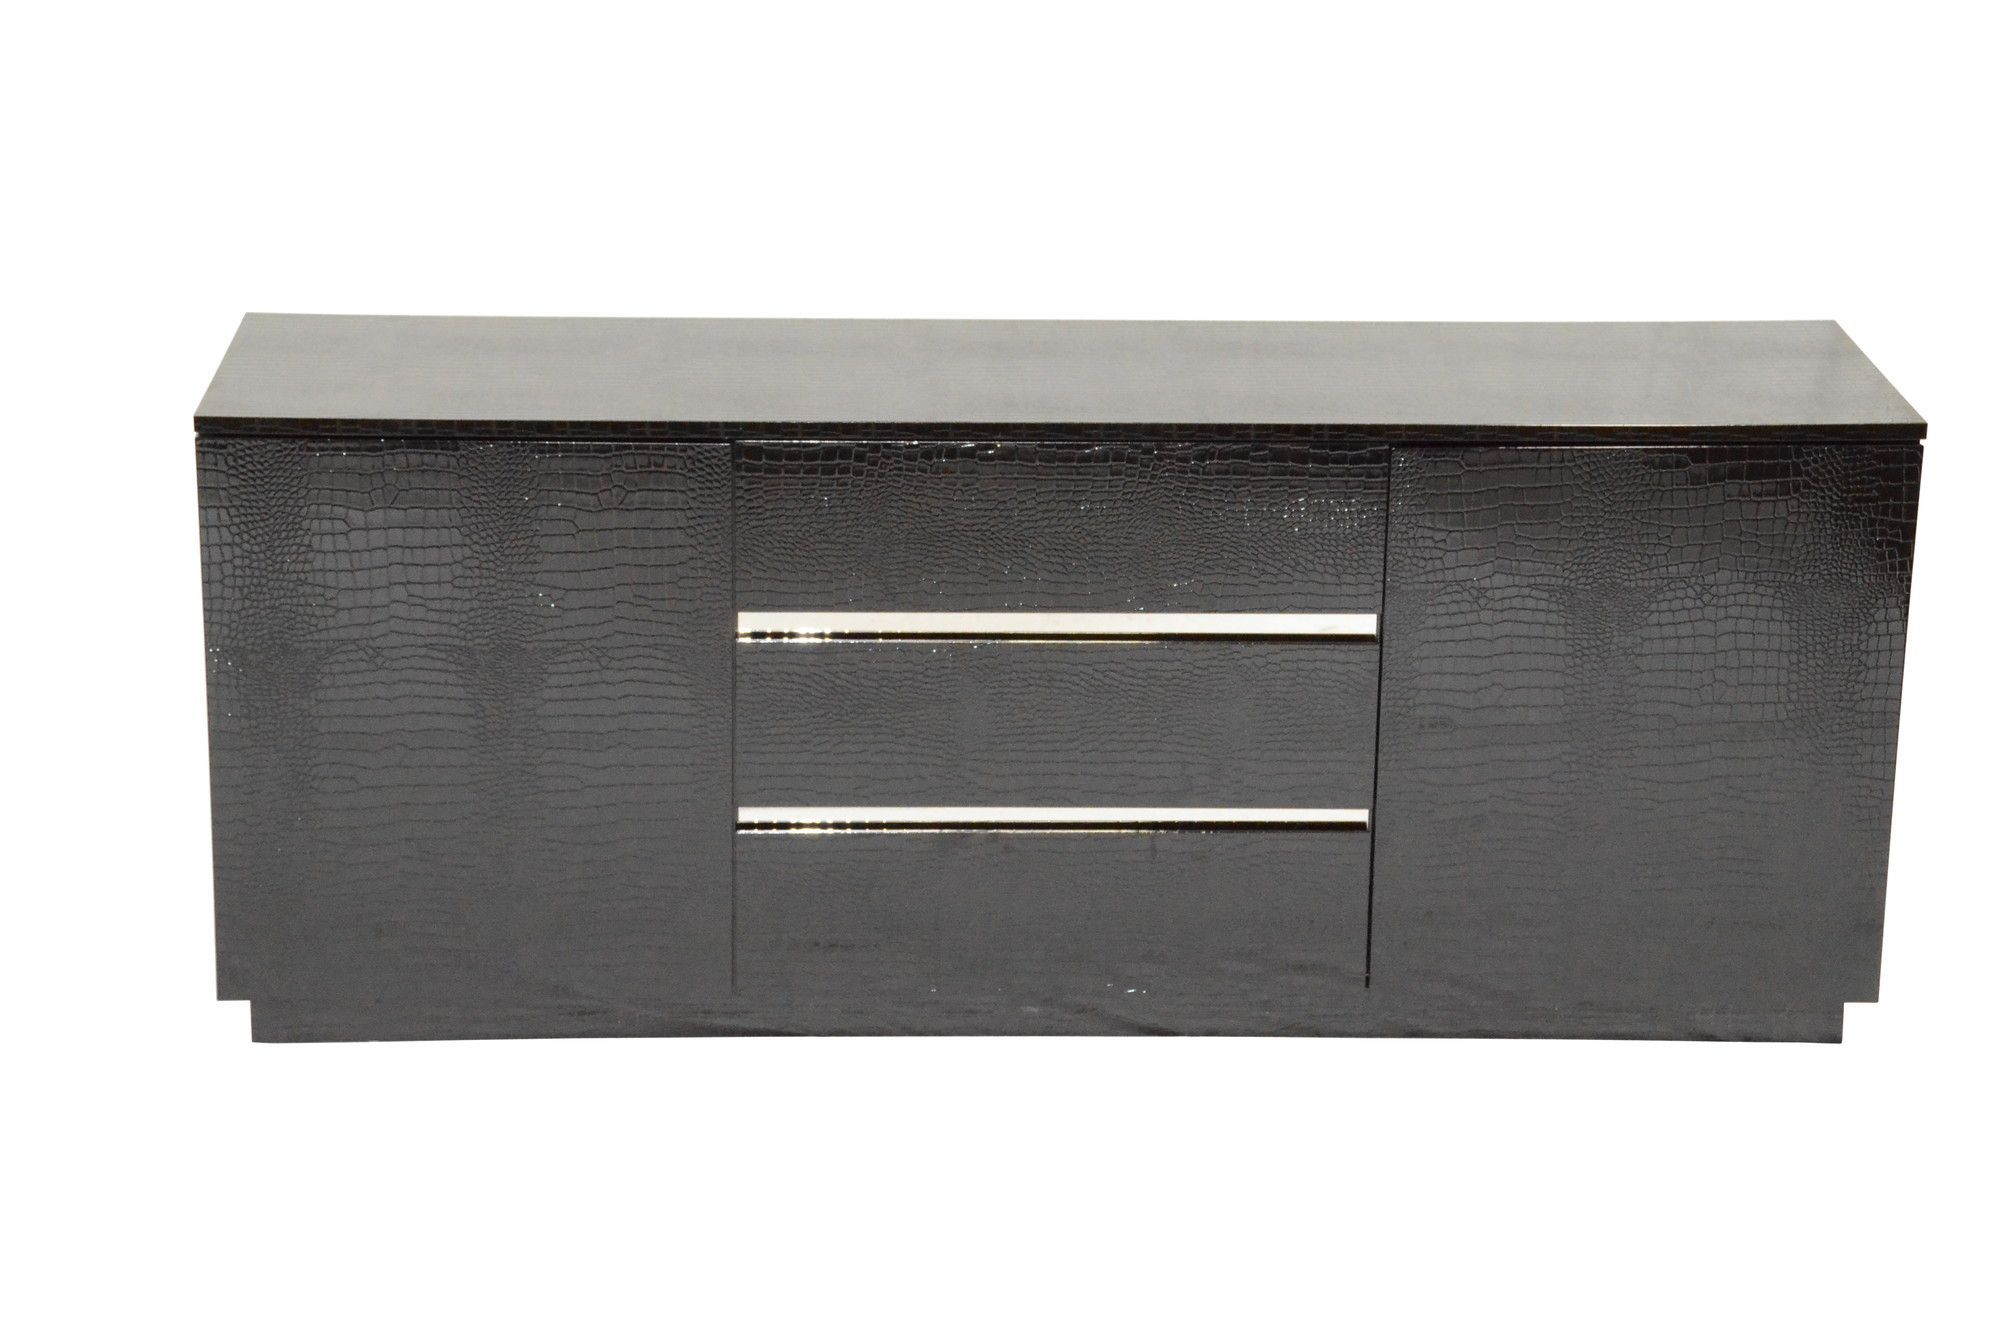 La Mirada Sideboard | Products | Modern Sideboard, Buffet Pertaining To Womack Sideboards (View 6 of 30)